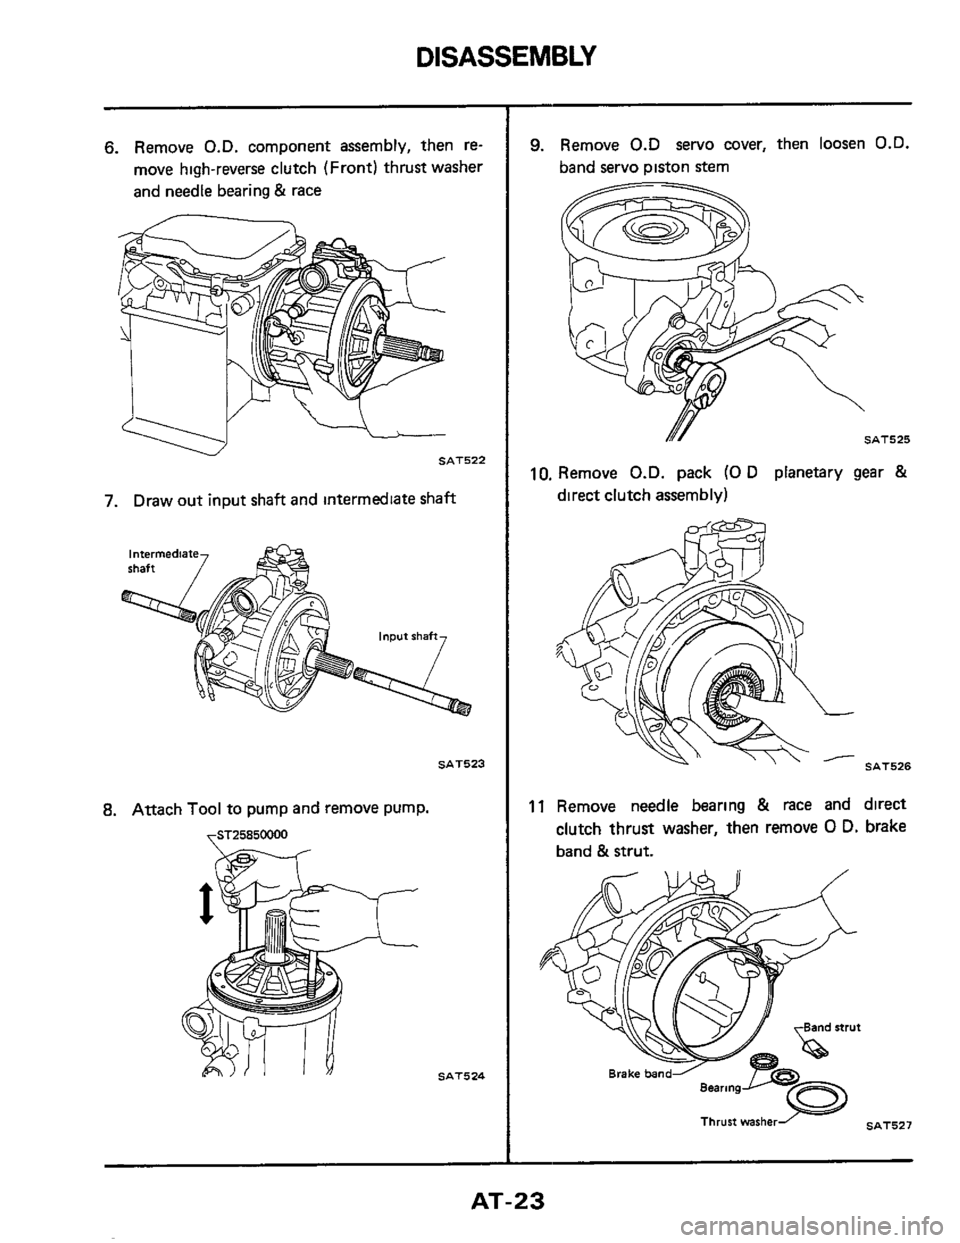 NISSAN 300ZX 1984 Z31 Automatic Transmission Owners Manual DISASSEMBLY 
6. Remove O.D. component  assembly, then re- 
move  high-reverse  clutch (Front)  thrust washer 
and  needle bearing 
& race 
7. Draw  out input  shaft and intermedtate shaft 
8. Attach T